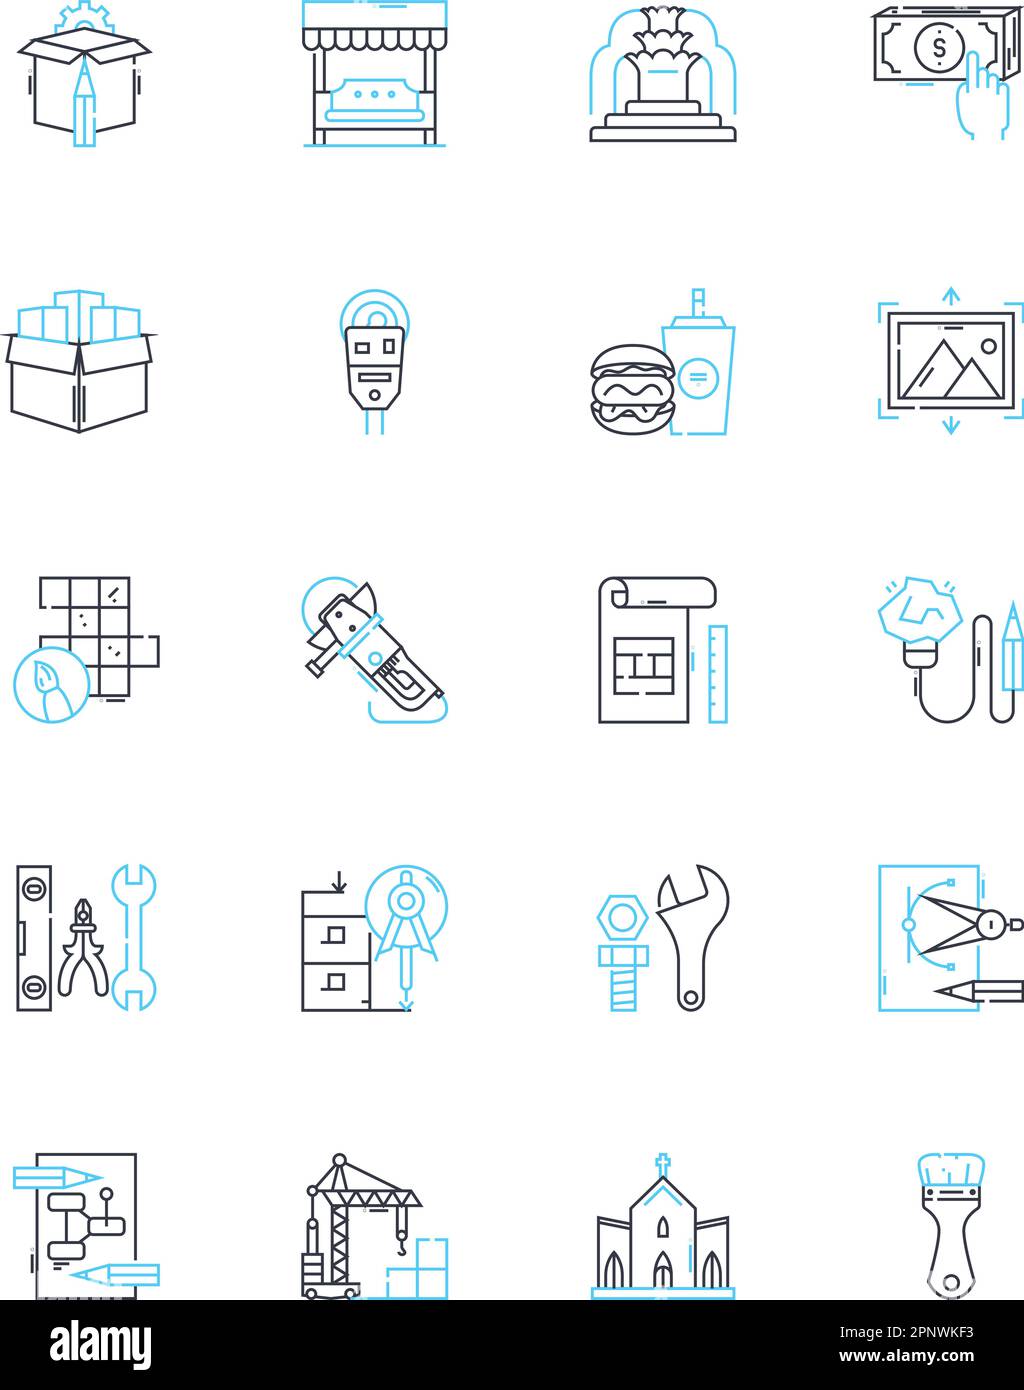 Drafting linear icons set. Blueprint, Design, Sketch, Diagram, Plan, Model, Rendering line vector and concept signs. Engineering,Draft,Layout outline Stock Vector